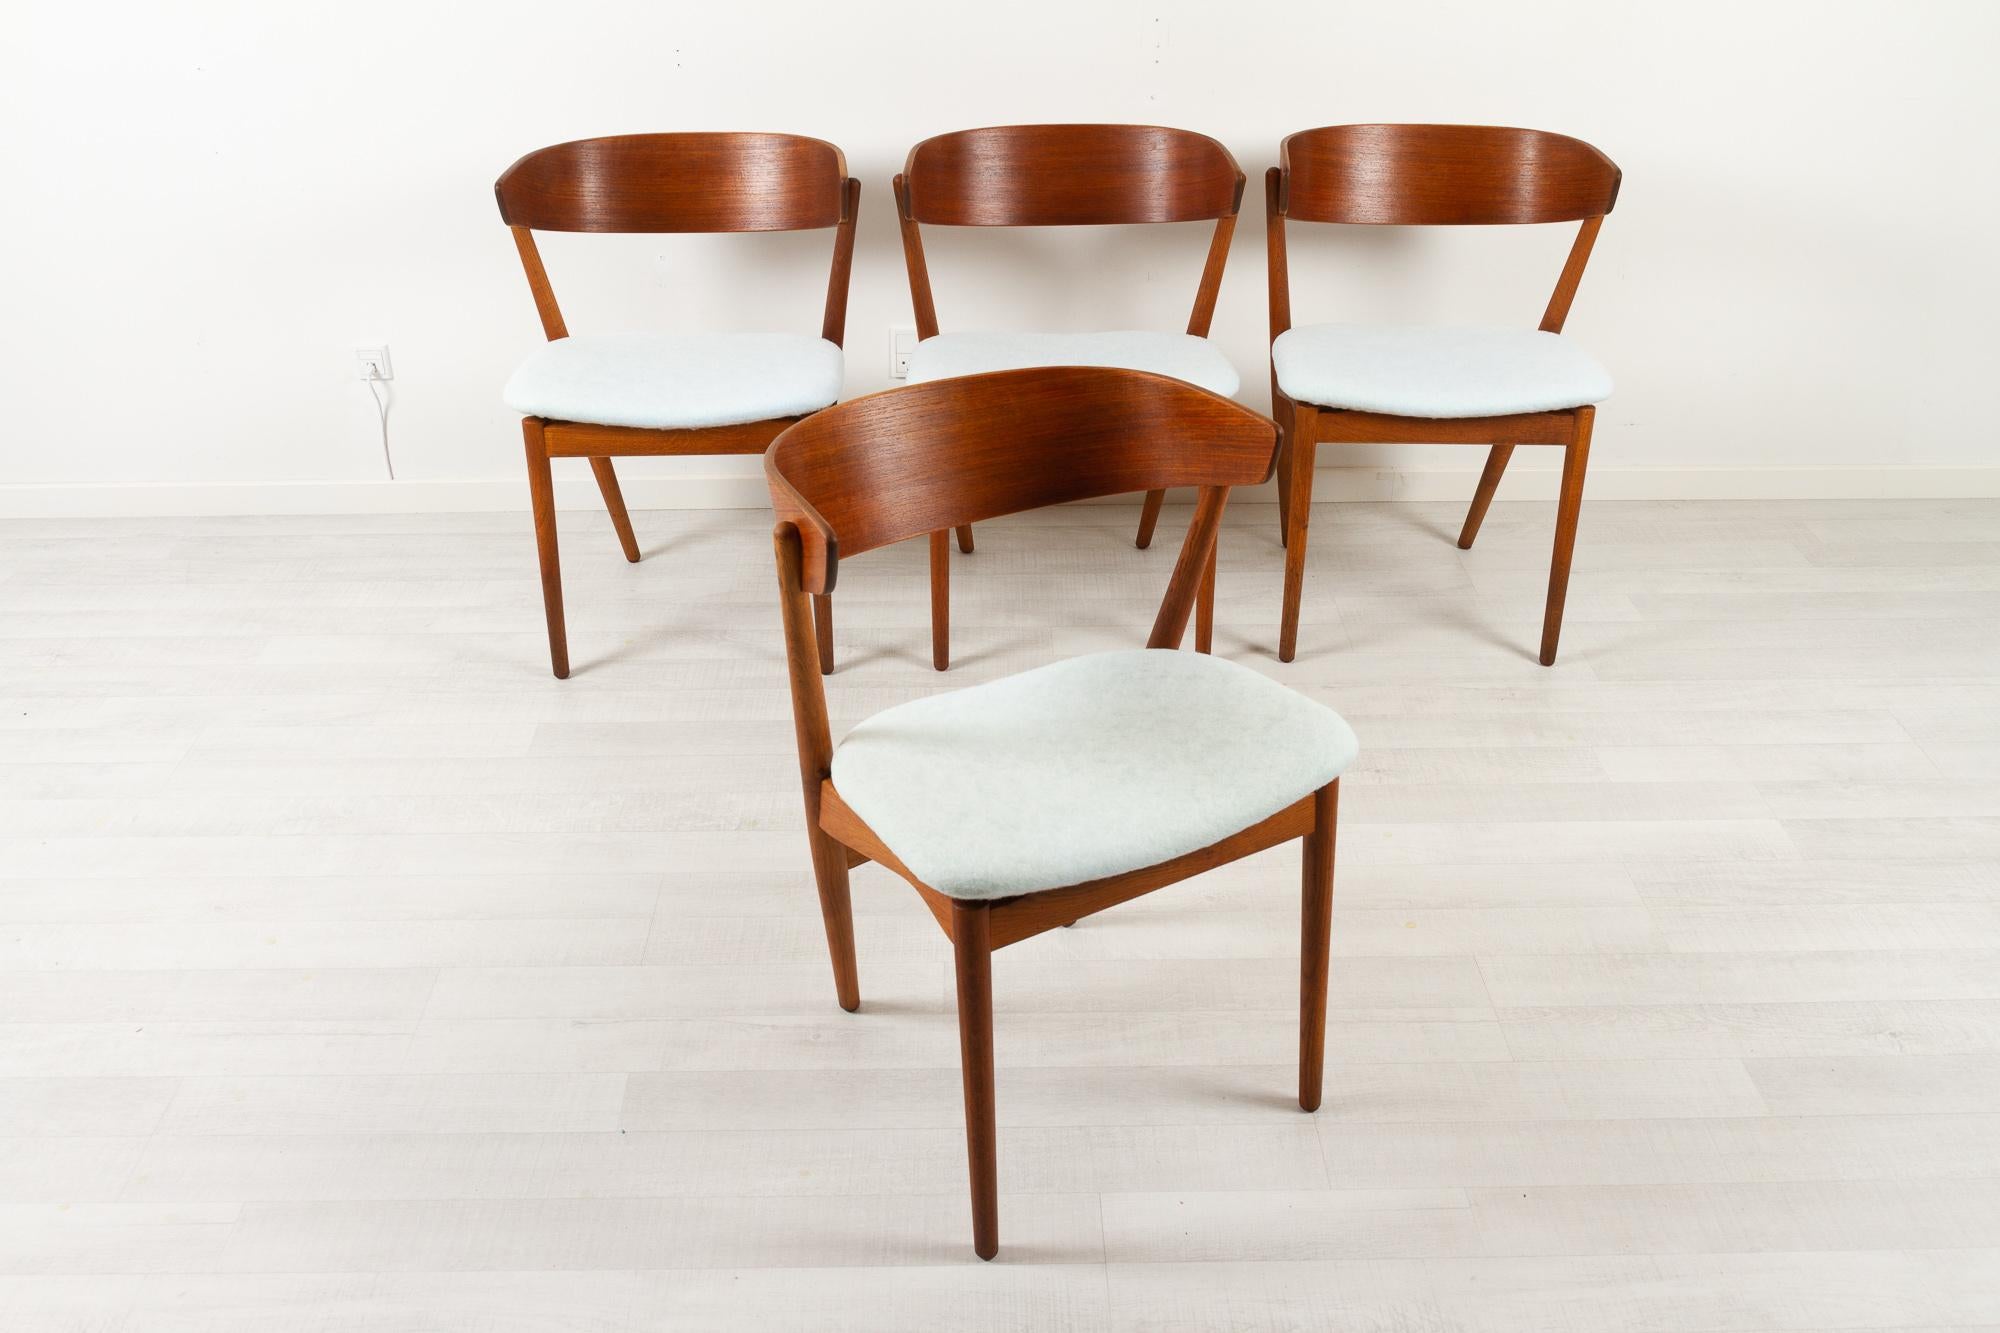 Vintage Danish Teak Dining Chairs No. 7 by Helge Sibast 1960s Set of 4 For Sale 5